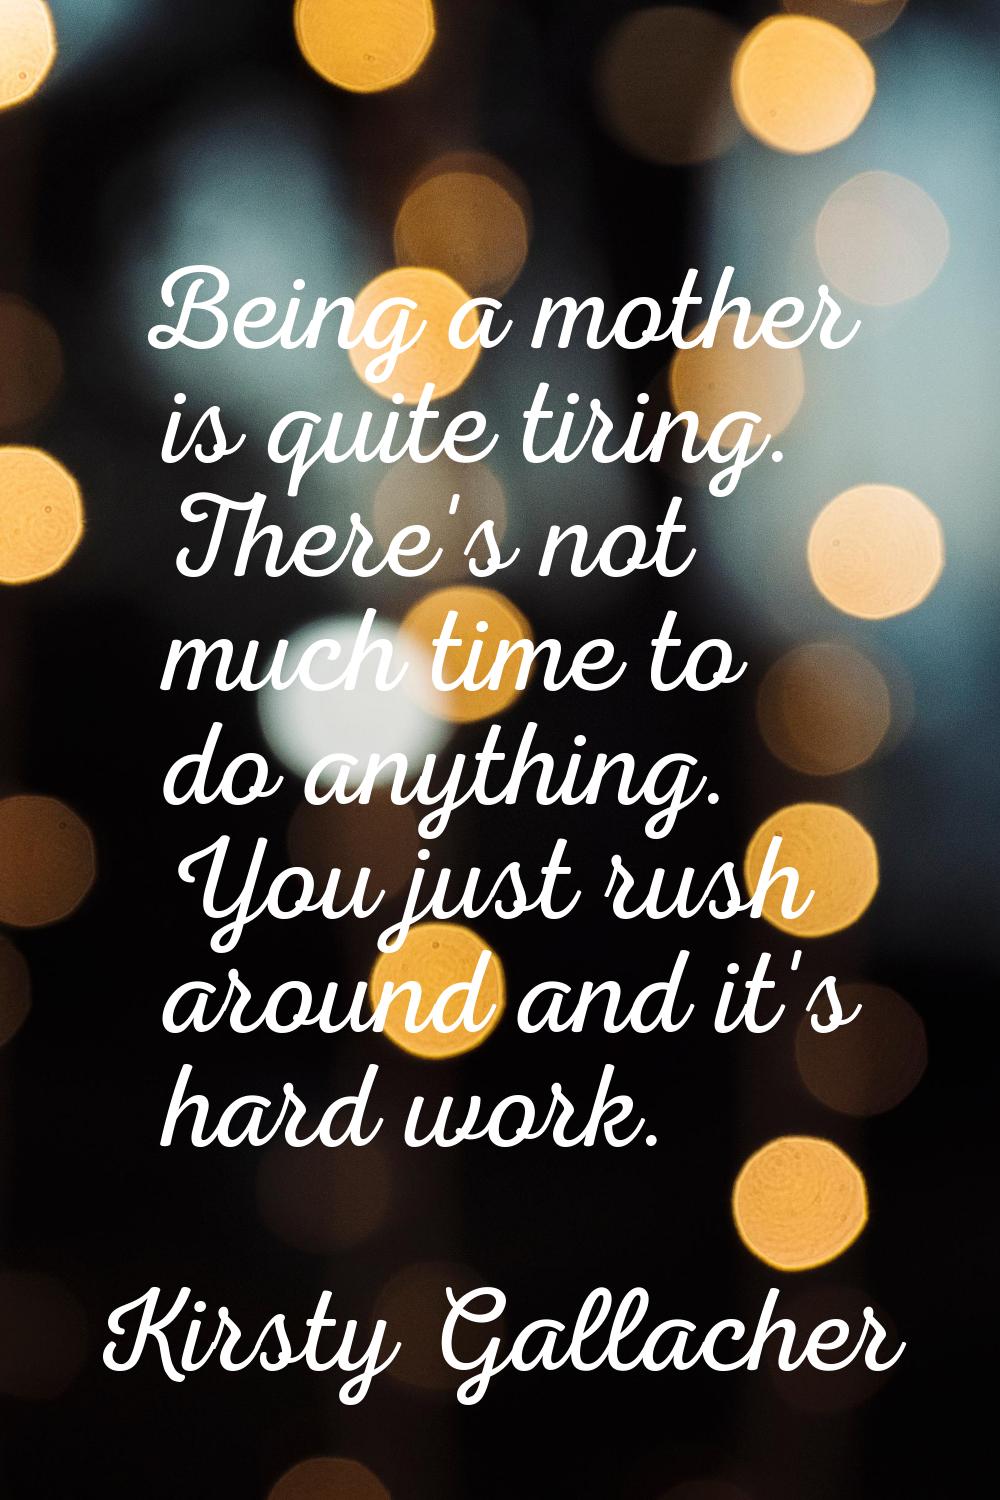 Being a mother is quite tiring. There's not much time to do anything. You just rush around and it's